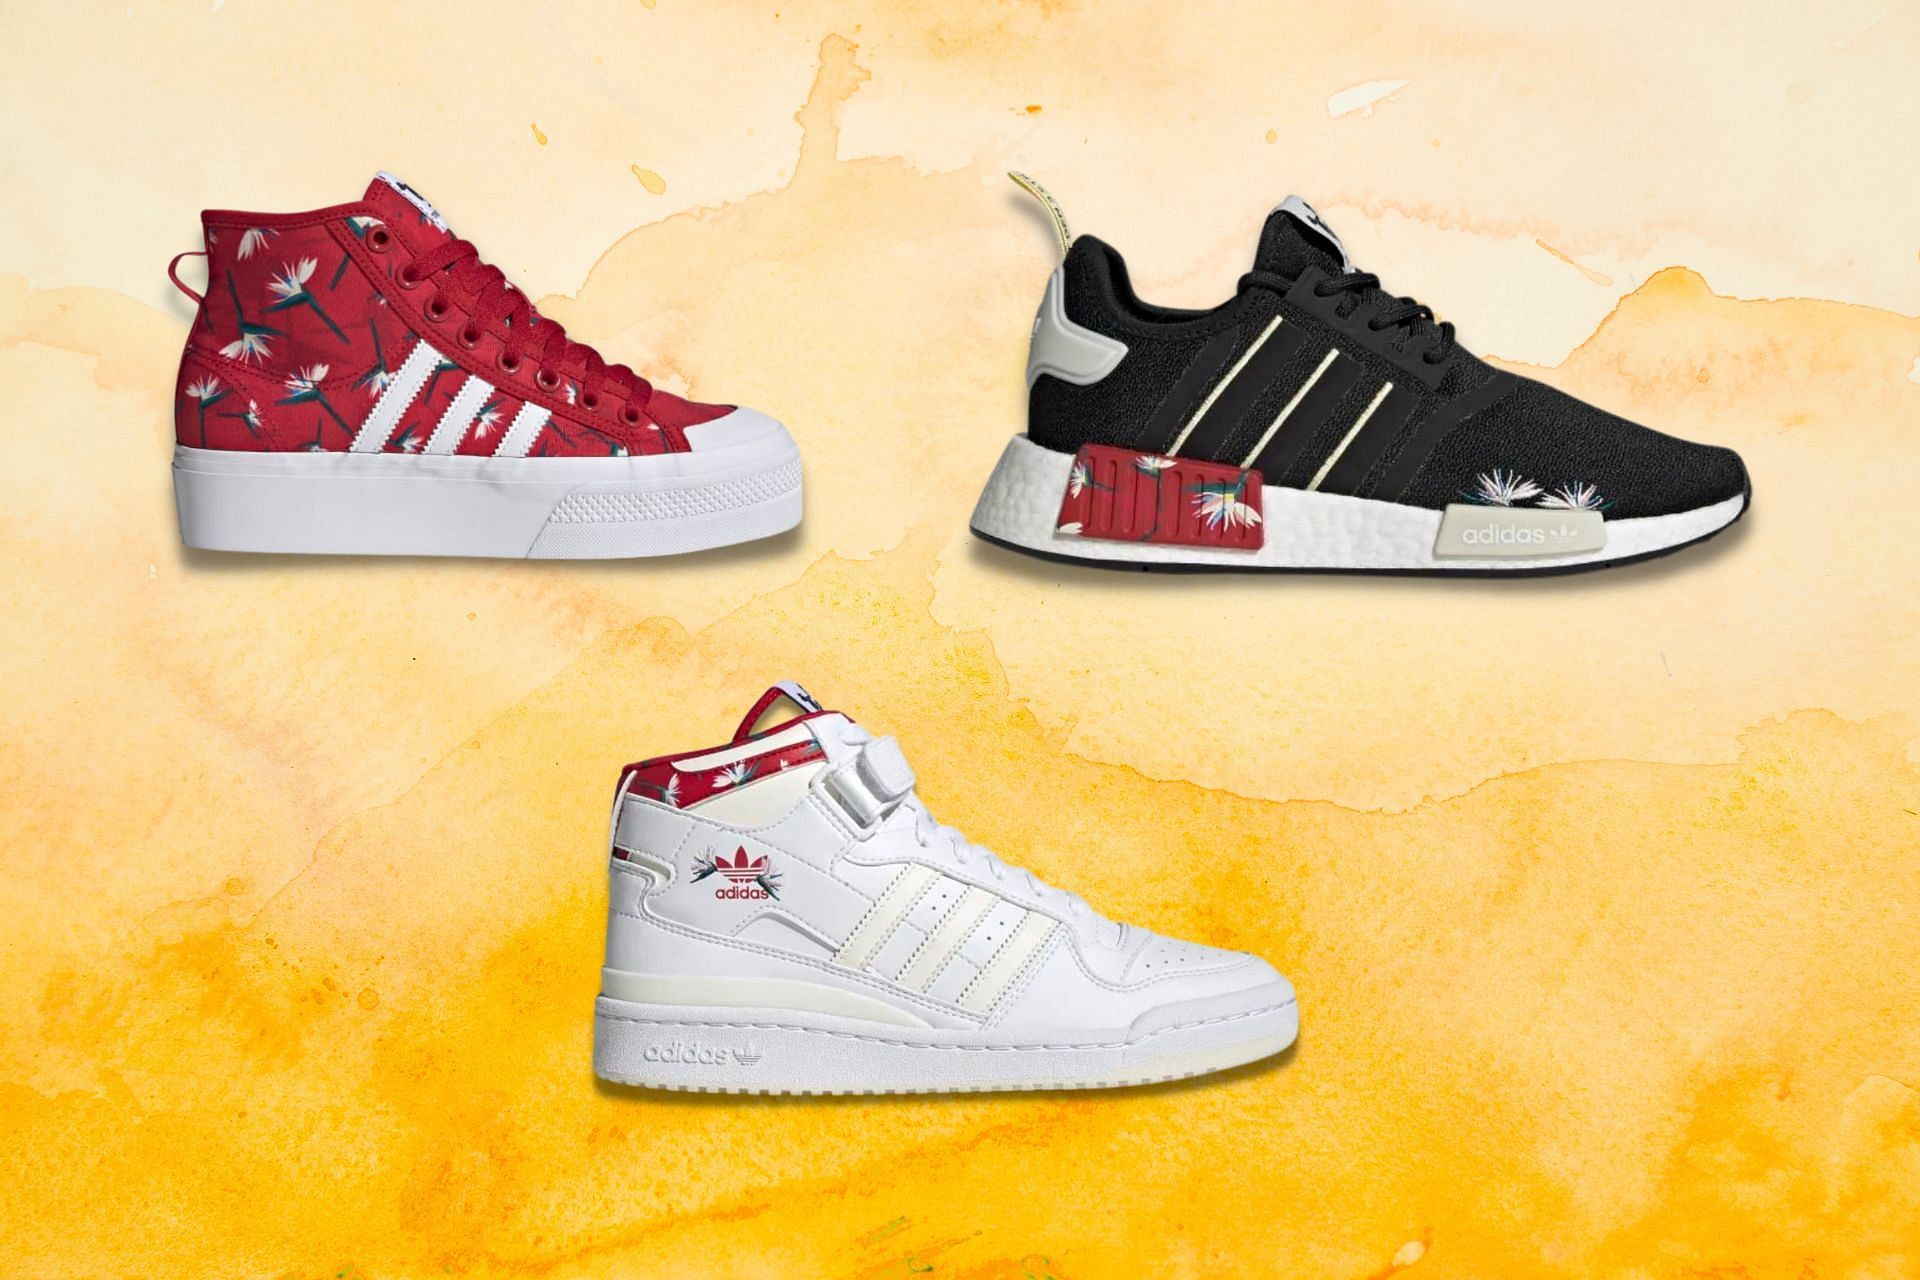 Newly revealed Adidas x Thebe Magugu 3-piece footwear collection featuring Forum Mid, NMD_R1, and Nizza Platform Mid (Image via Sportskeeda)